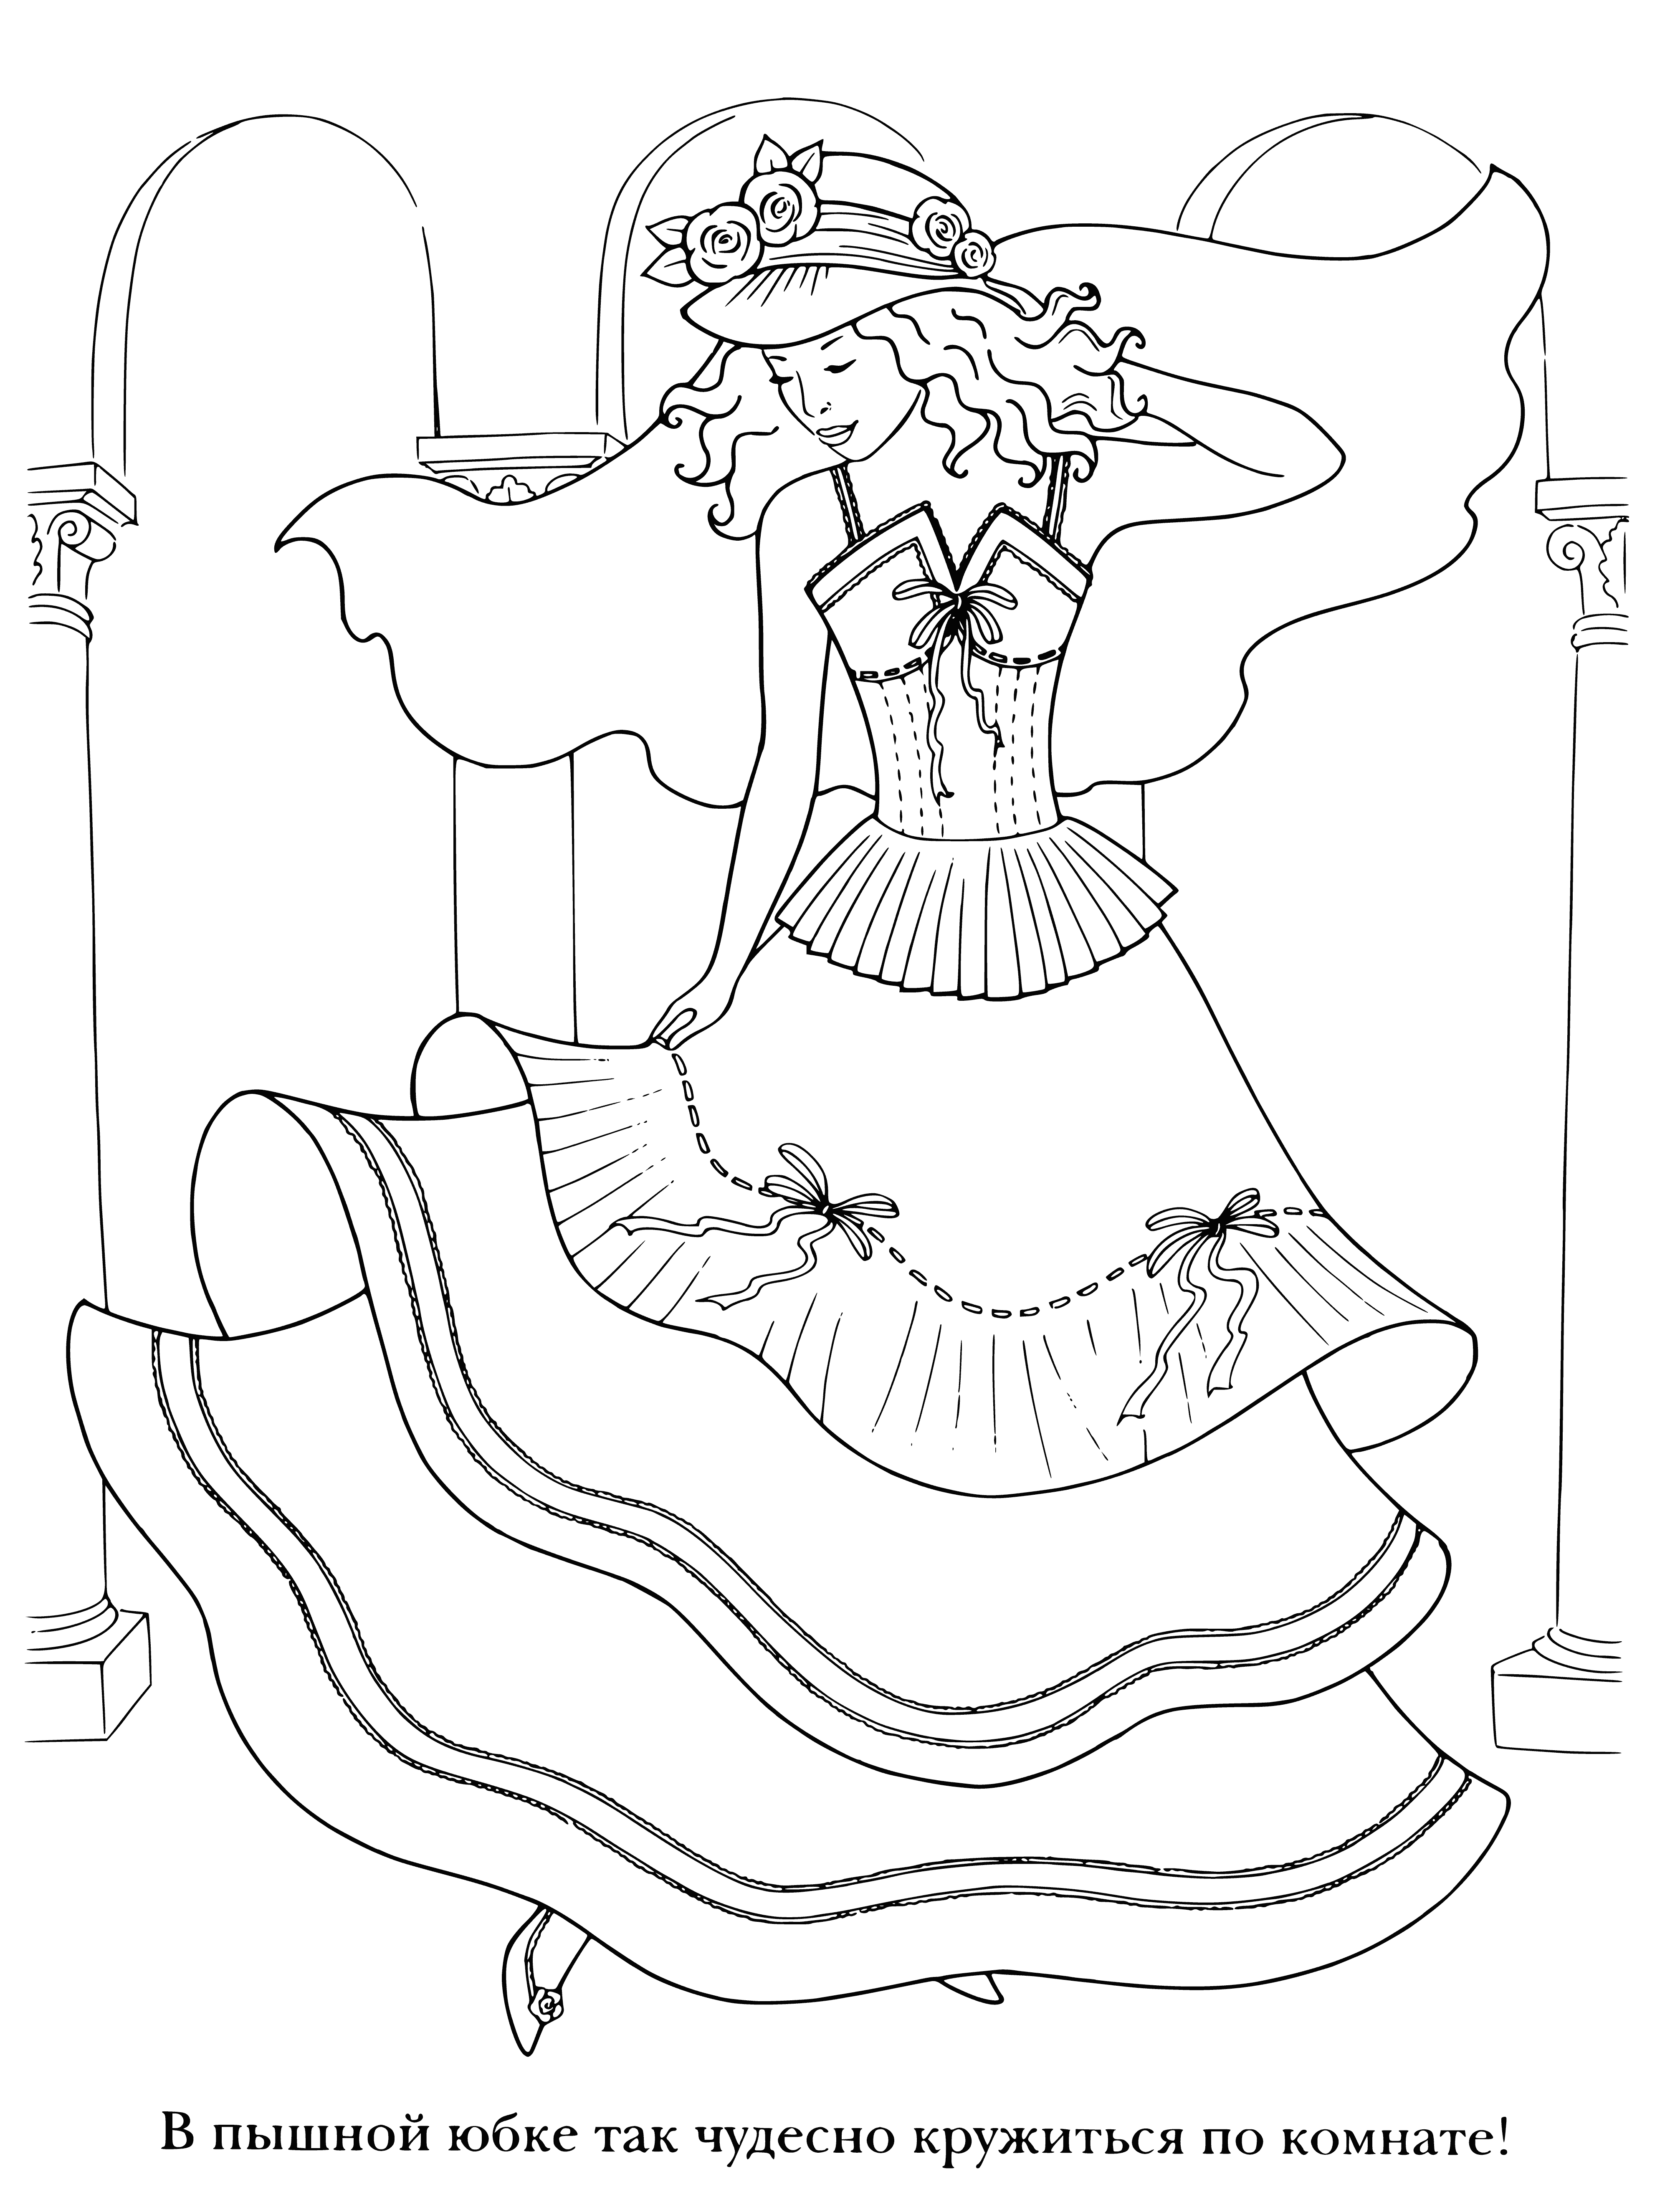 Fluffy skirt coloring page